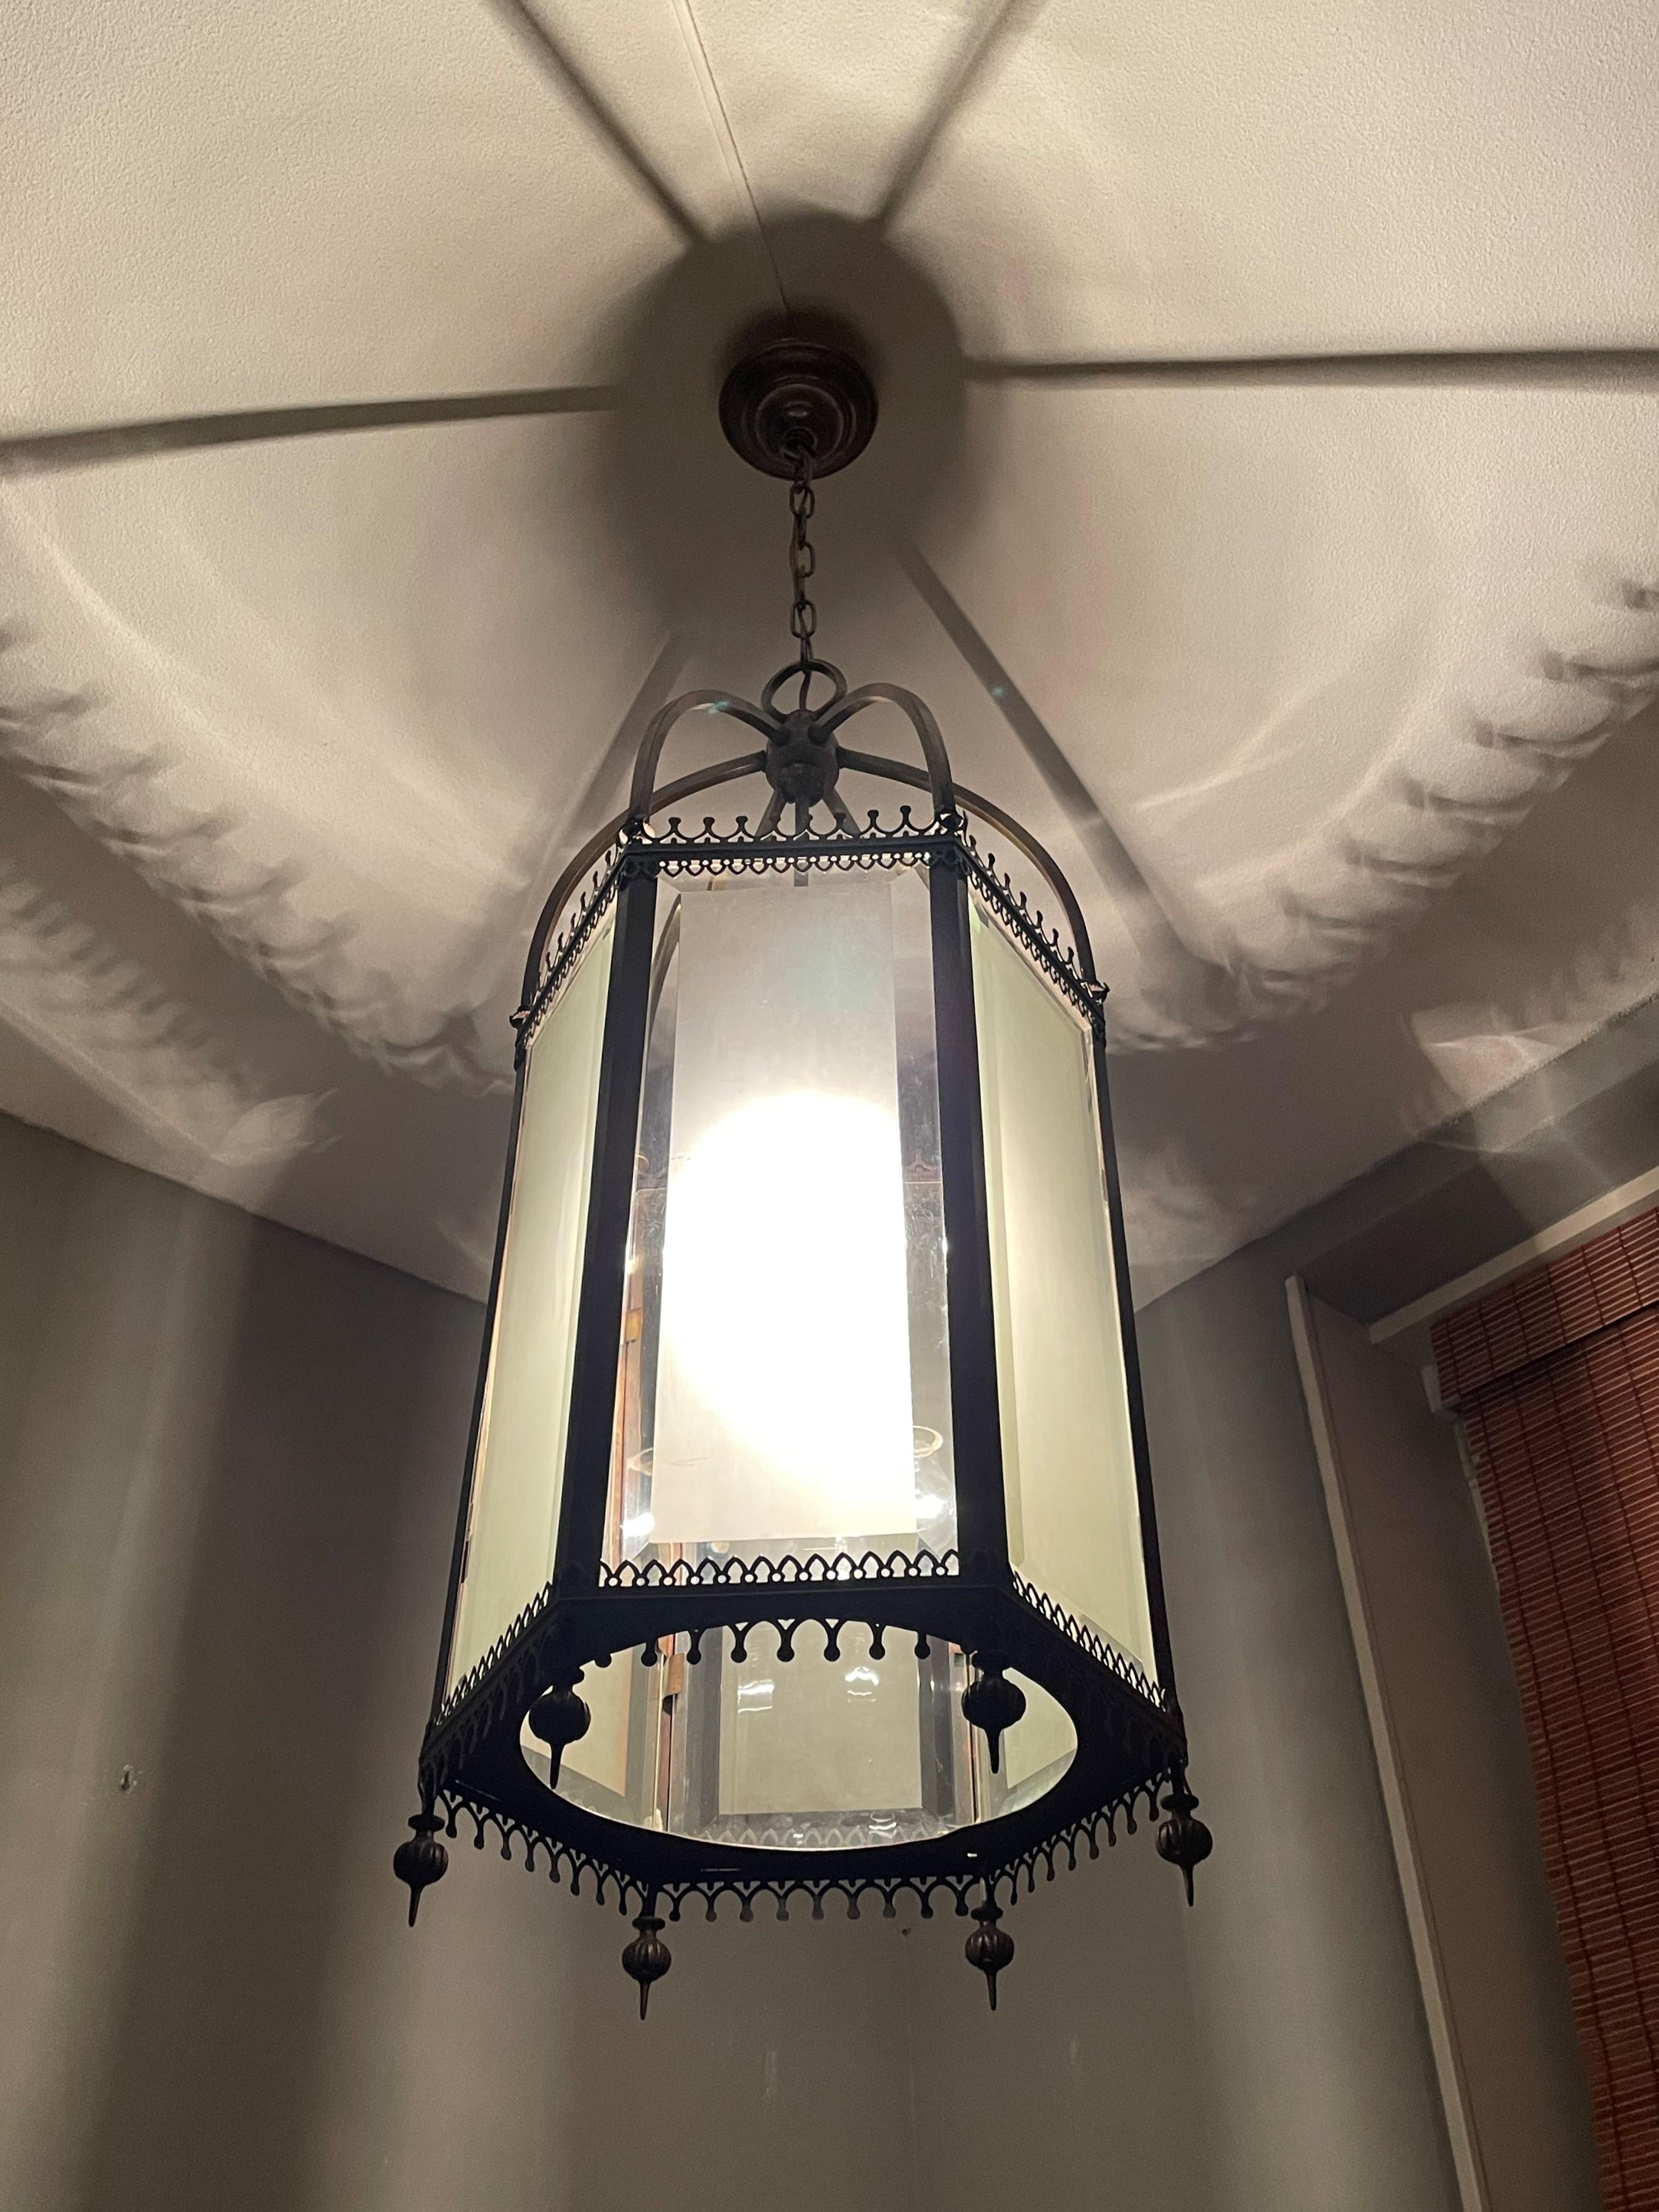 Truly impressive and great workmanship, hexagonal Gothic light fixture.

If you are a collector of truly amazing Gothic antiques then this large and possibly unique pendant could be flying your way soon. With antique light fixtures as one of our